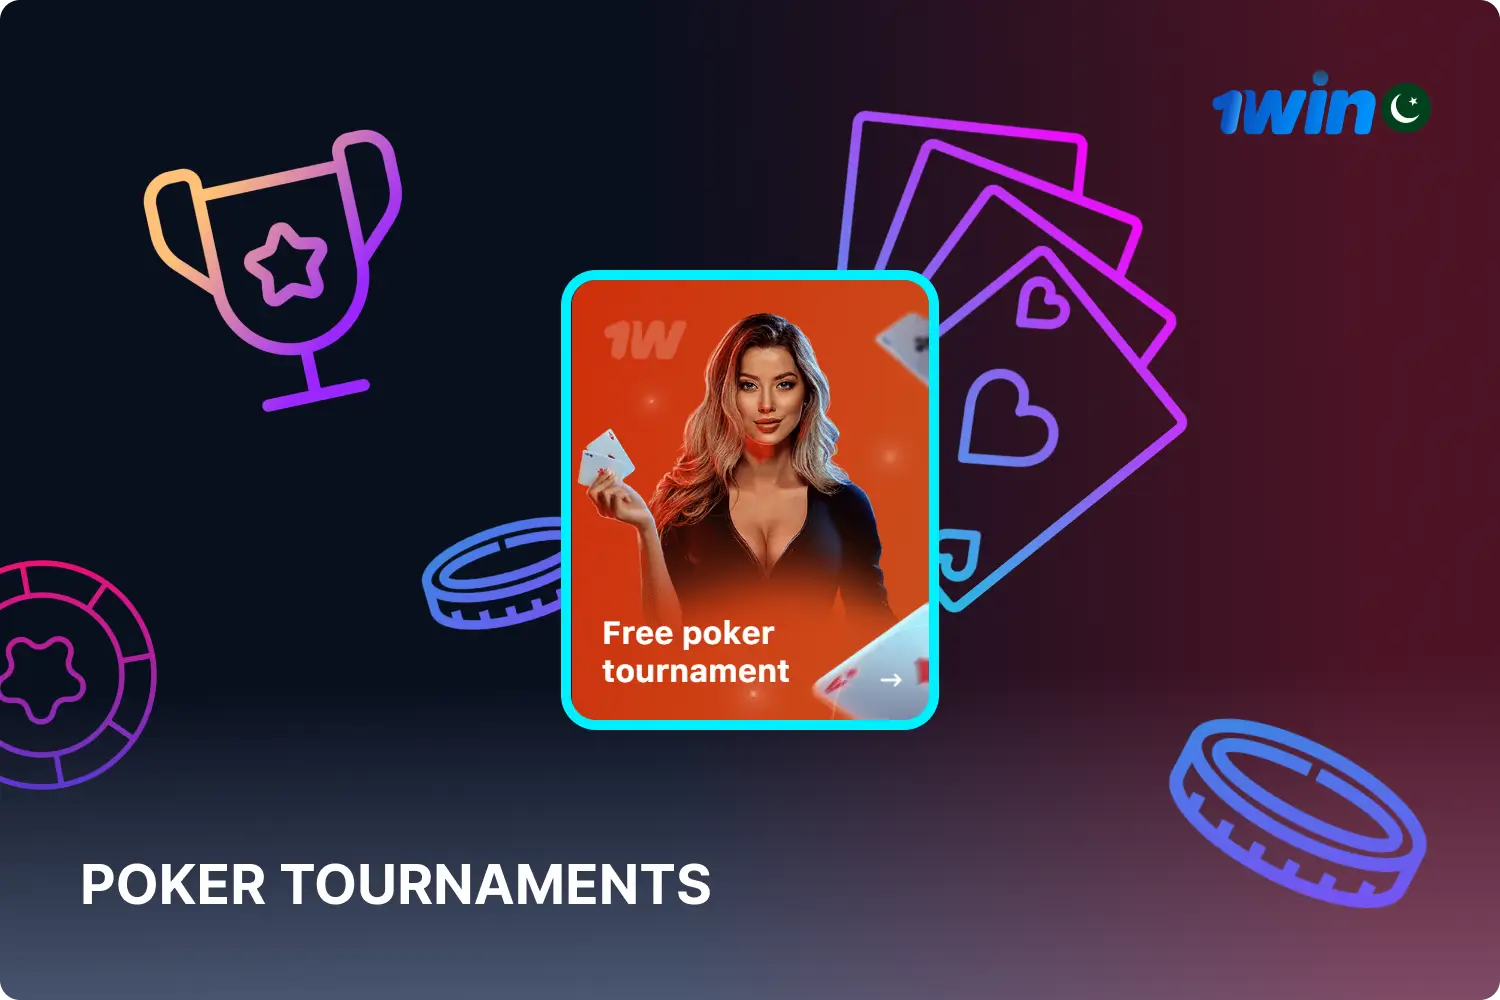 Players from Pakistan are encouraged to participate in 1win poker tournaments, competing for big prizes